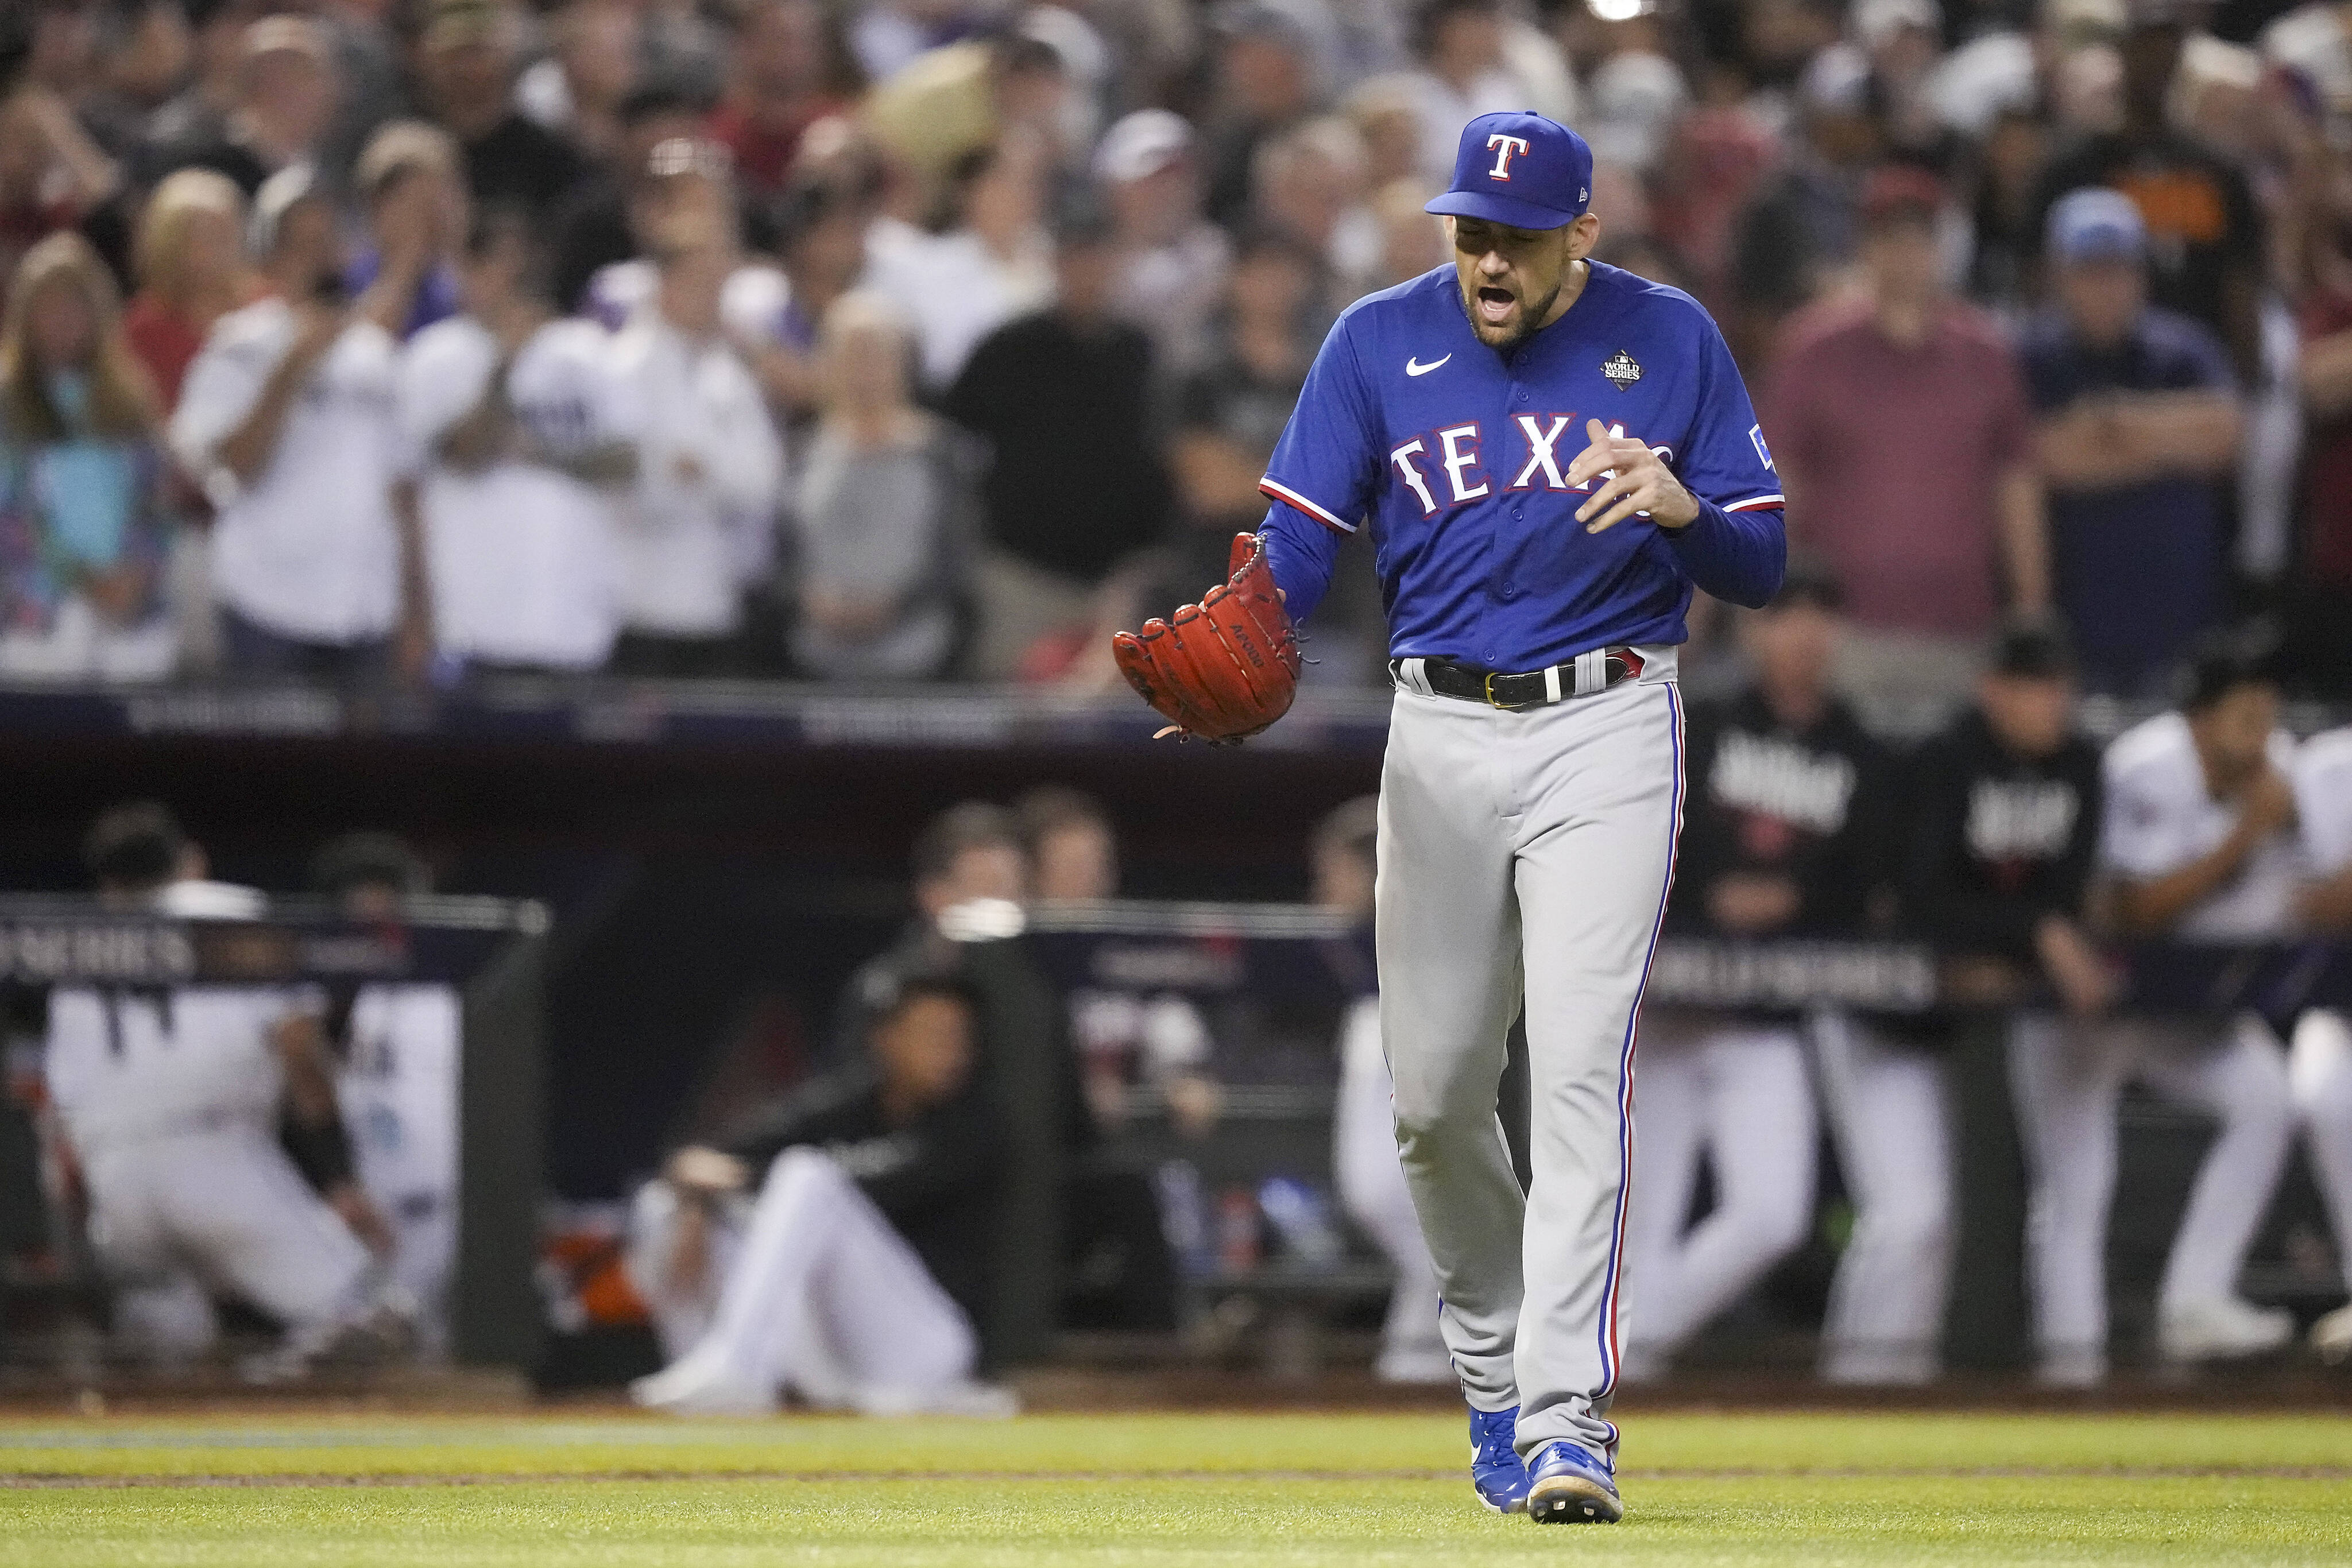 MLB on X: For the first time in franchise history, the Texas